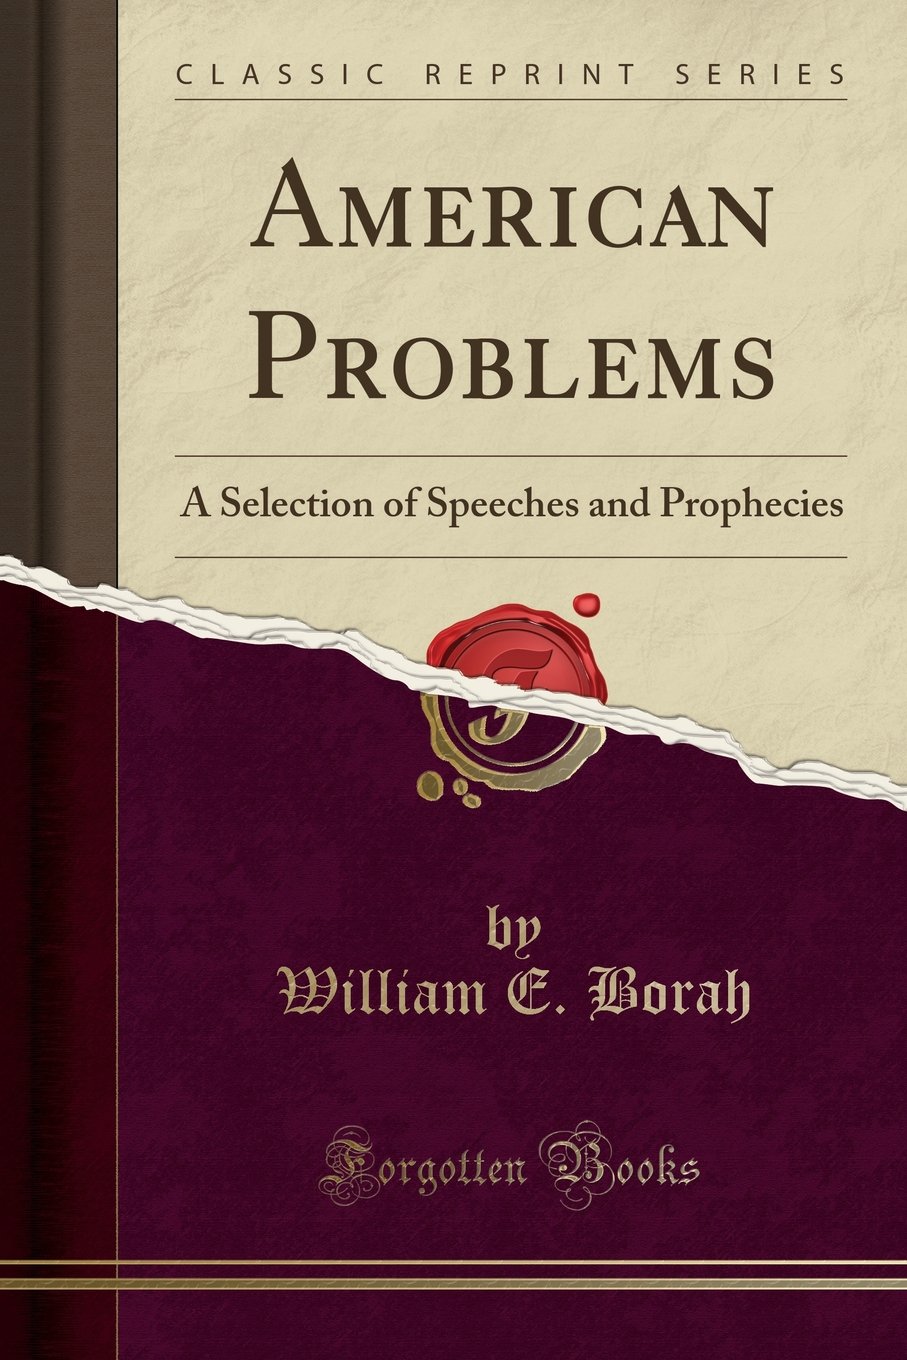 American problems: A selection of speeches and prophecies (book cover)